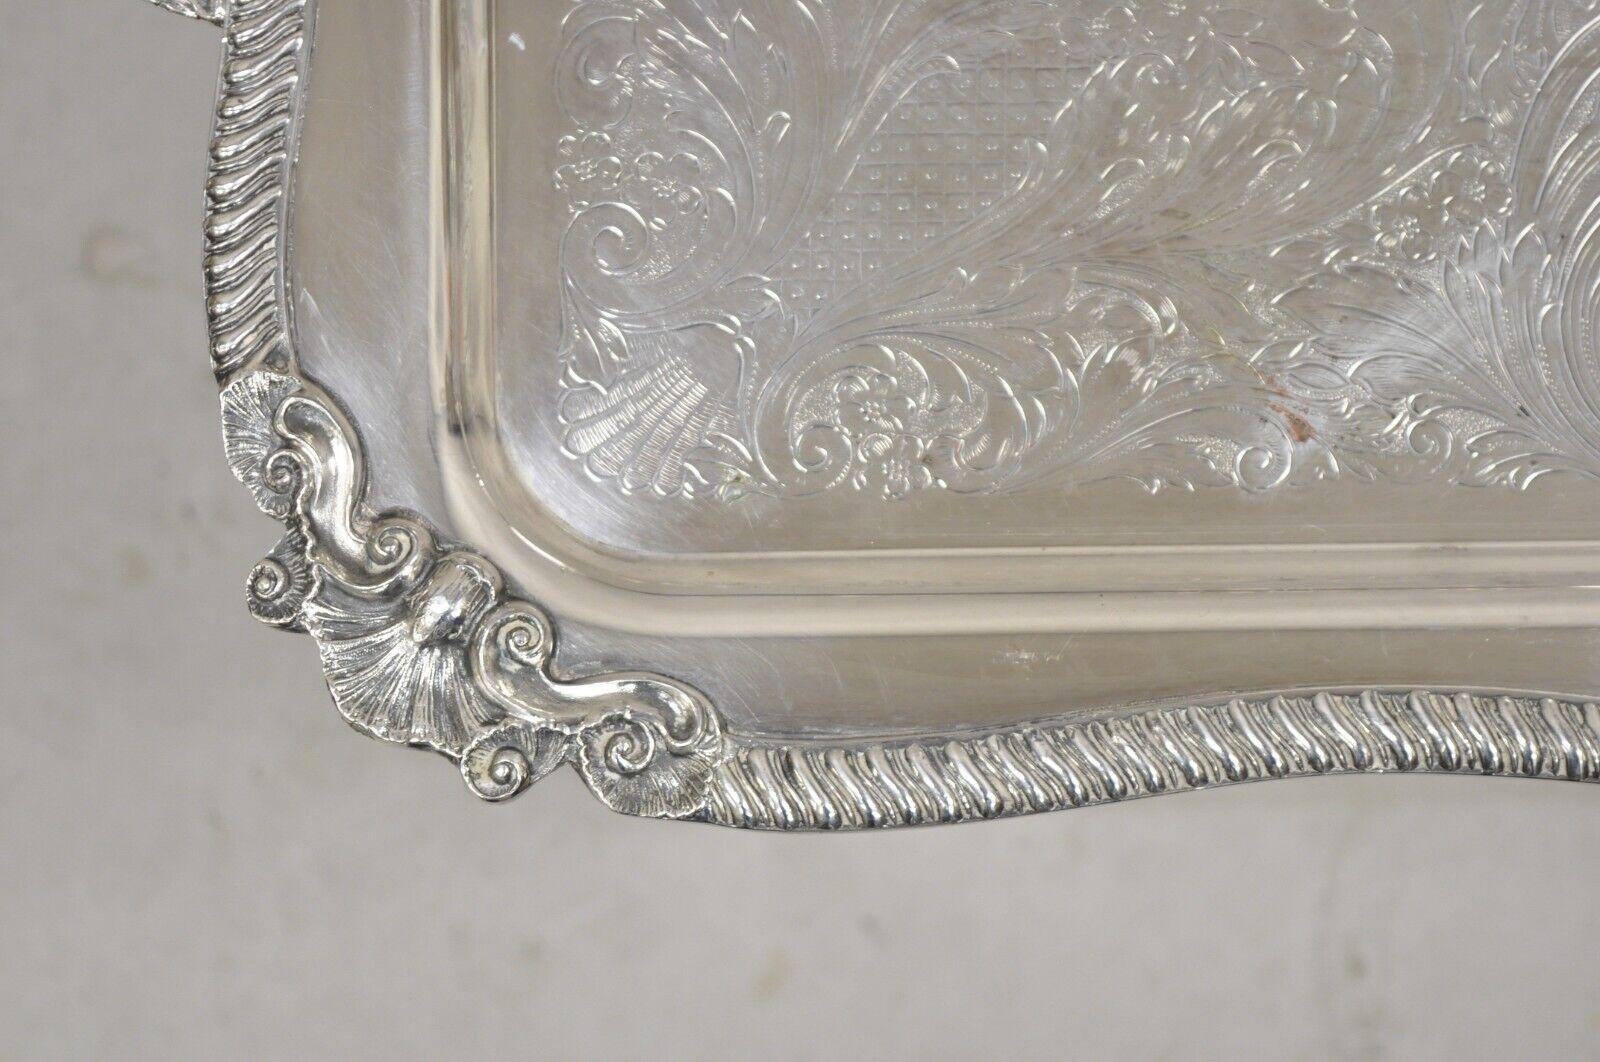 EPCA Poole Silver Co 400 Lancaster Rose Large Silver Plated Serving Platter Tray For Sale 1